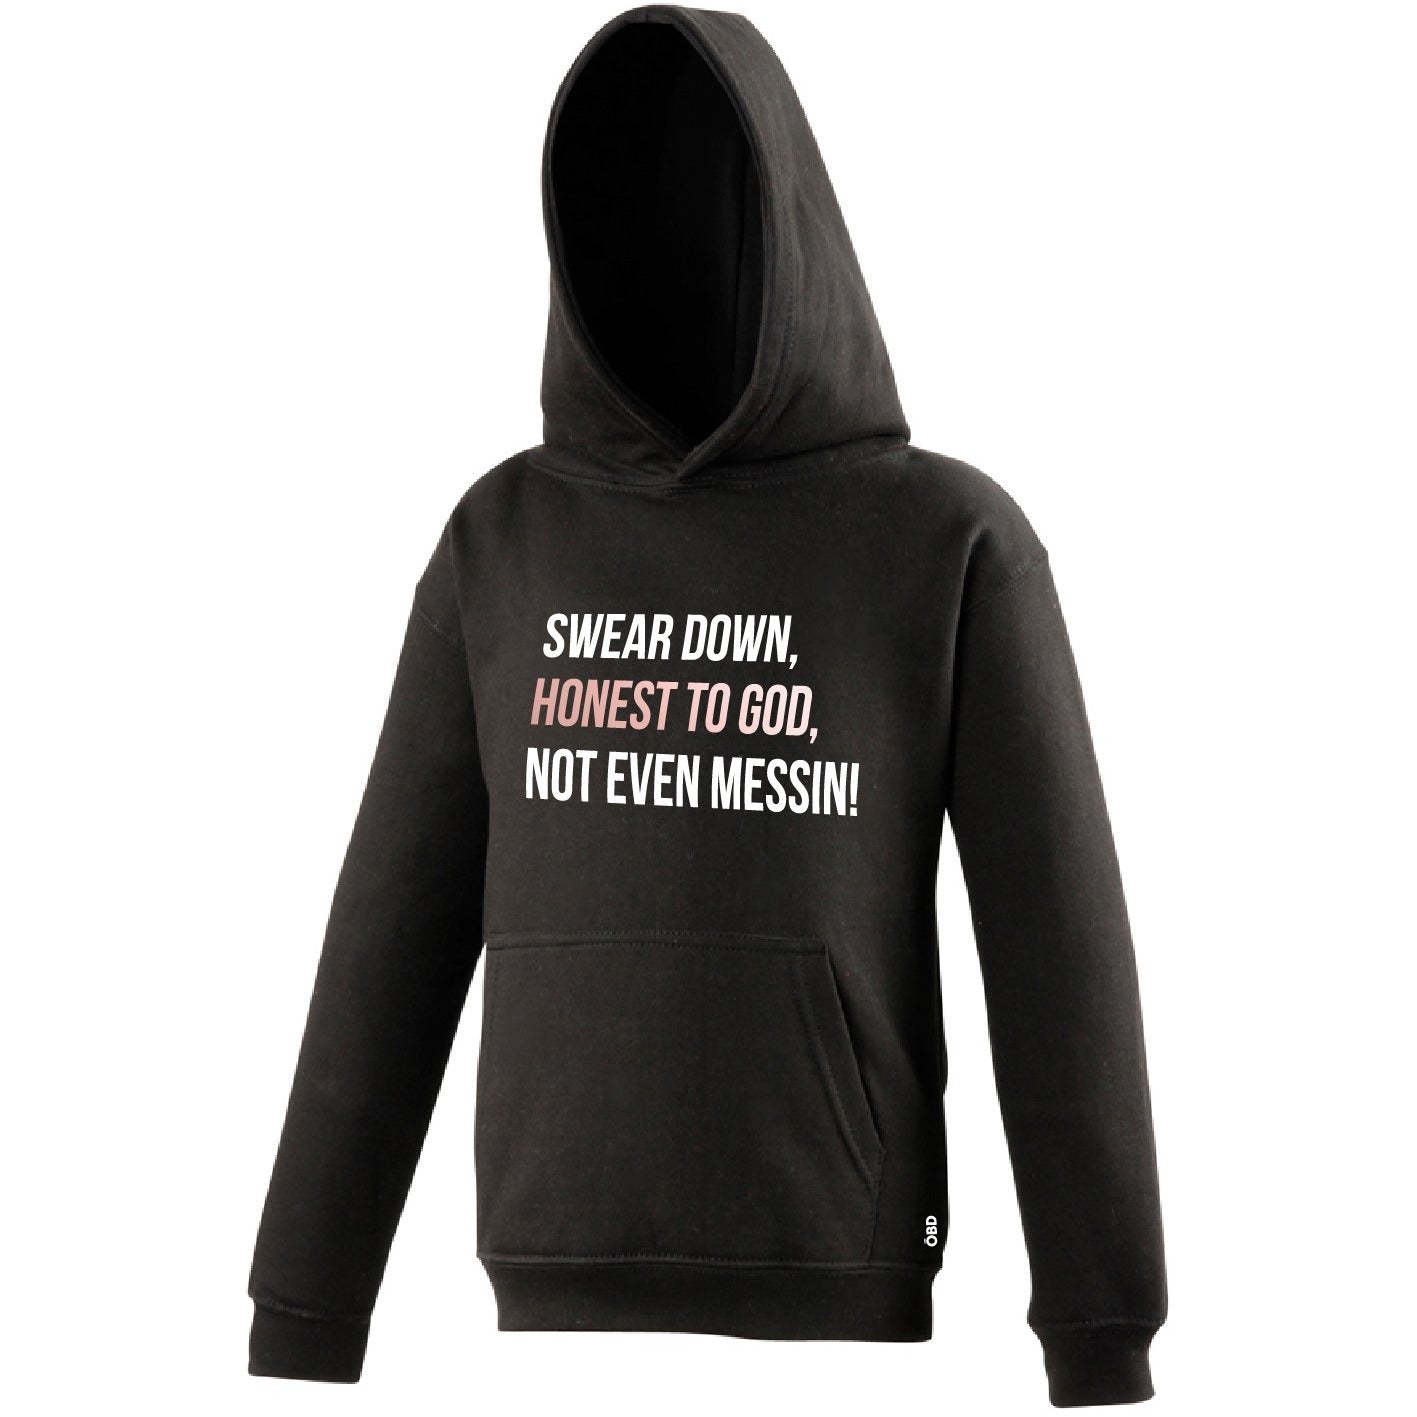 Scouse bird problems, Scouse bird blogs, Scouse bird probs, swear down, hoody, hoodie, kids, clothing, clothes, for girls, girlie, alternative, gifts, gifting, pink, grey, purple, 